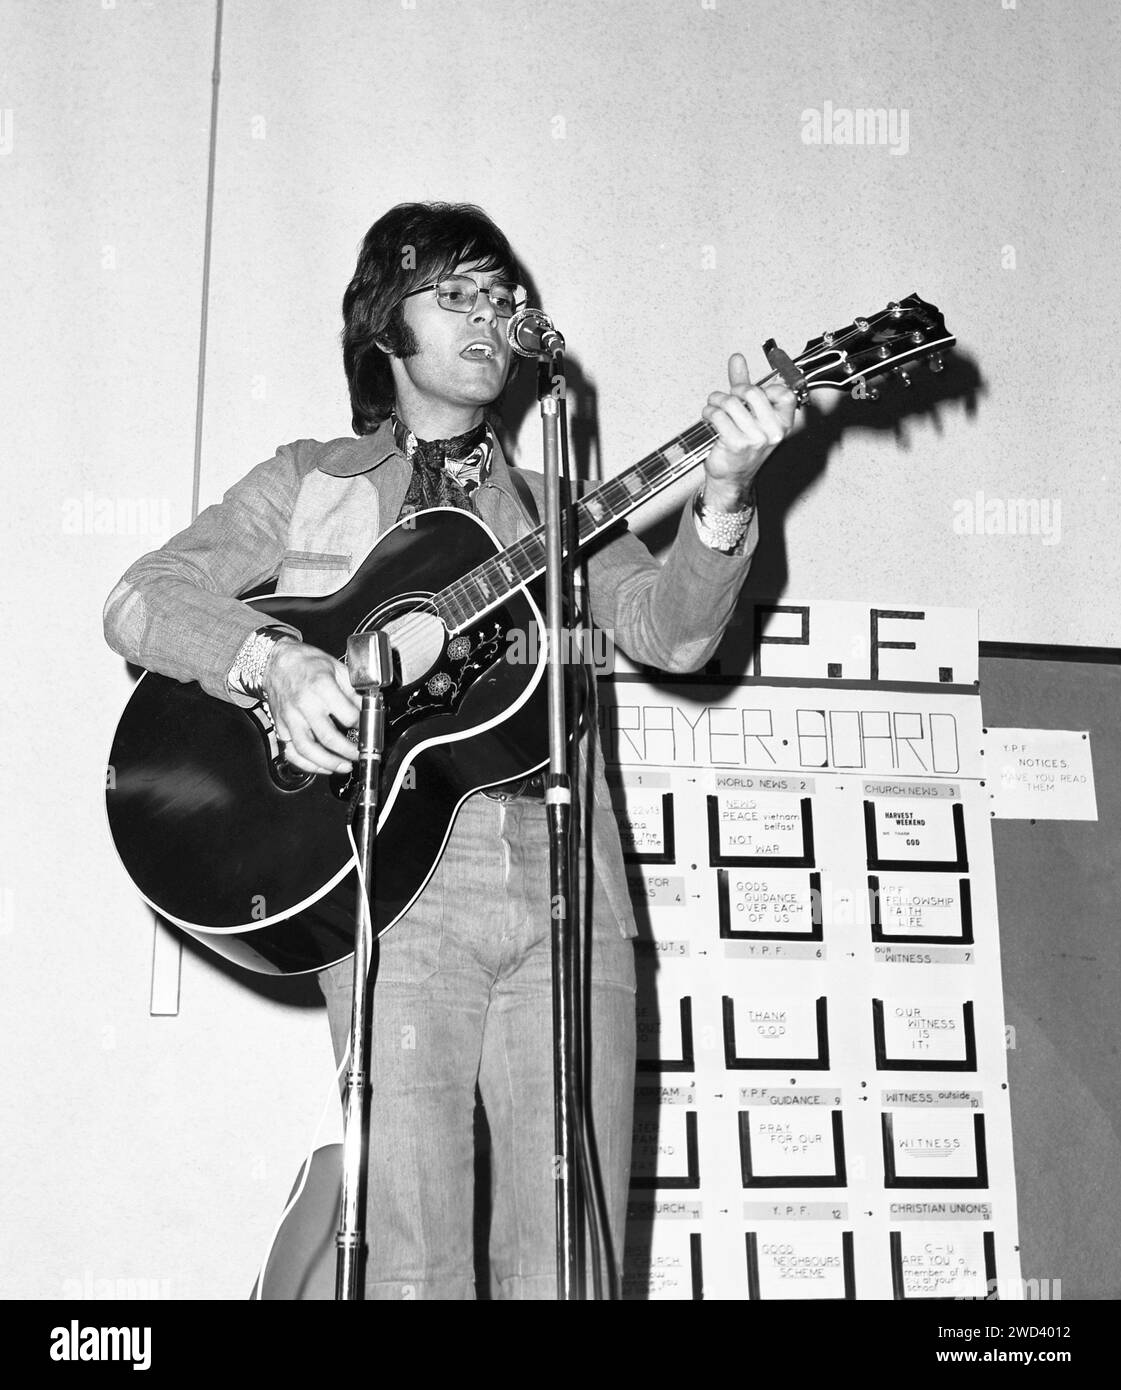 Cliff Richard playing guitar and singing at a charity event in a church hall, 1971 Stock Photo